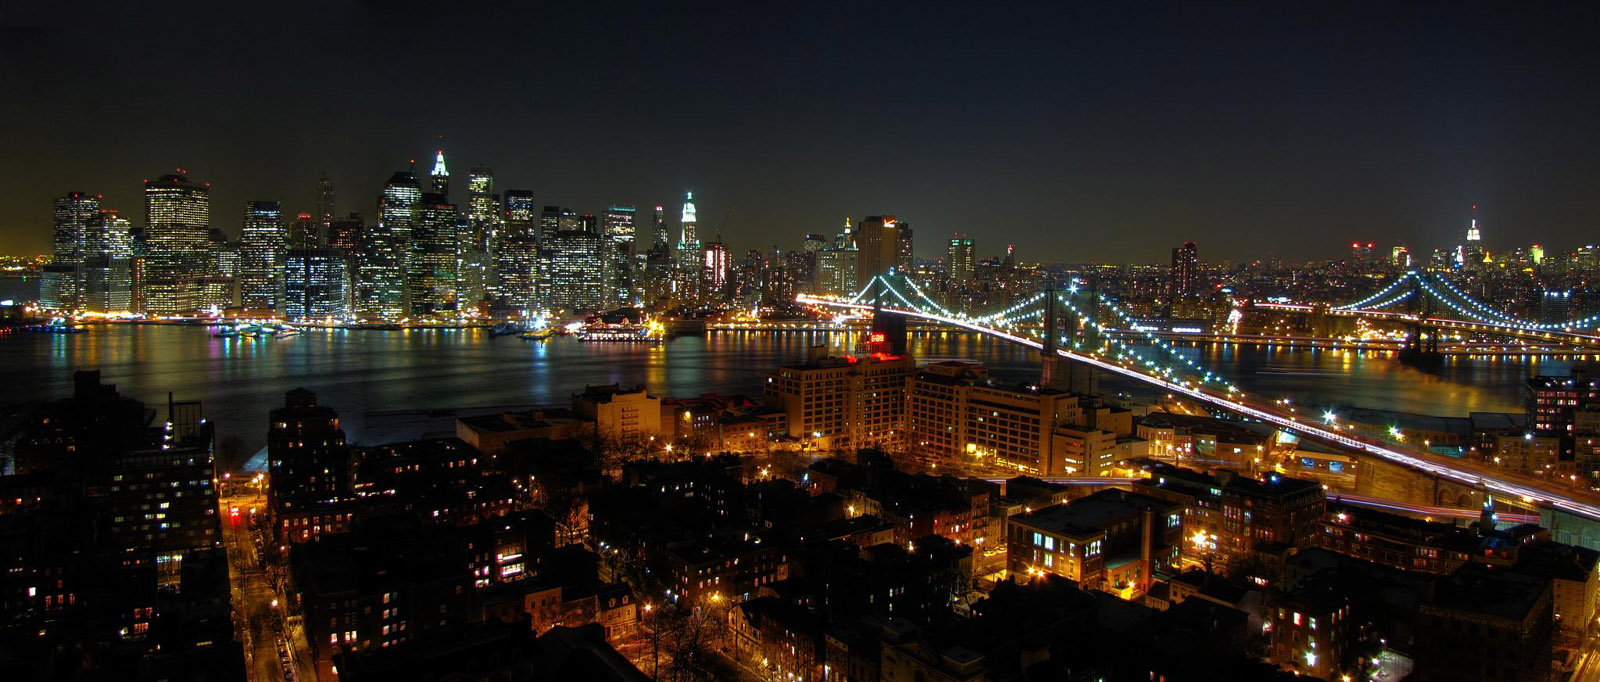 Wonderfull Night View from New York City HD Wallpapers Photos Download